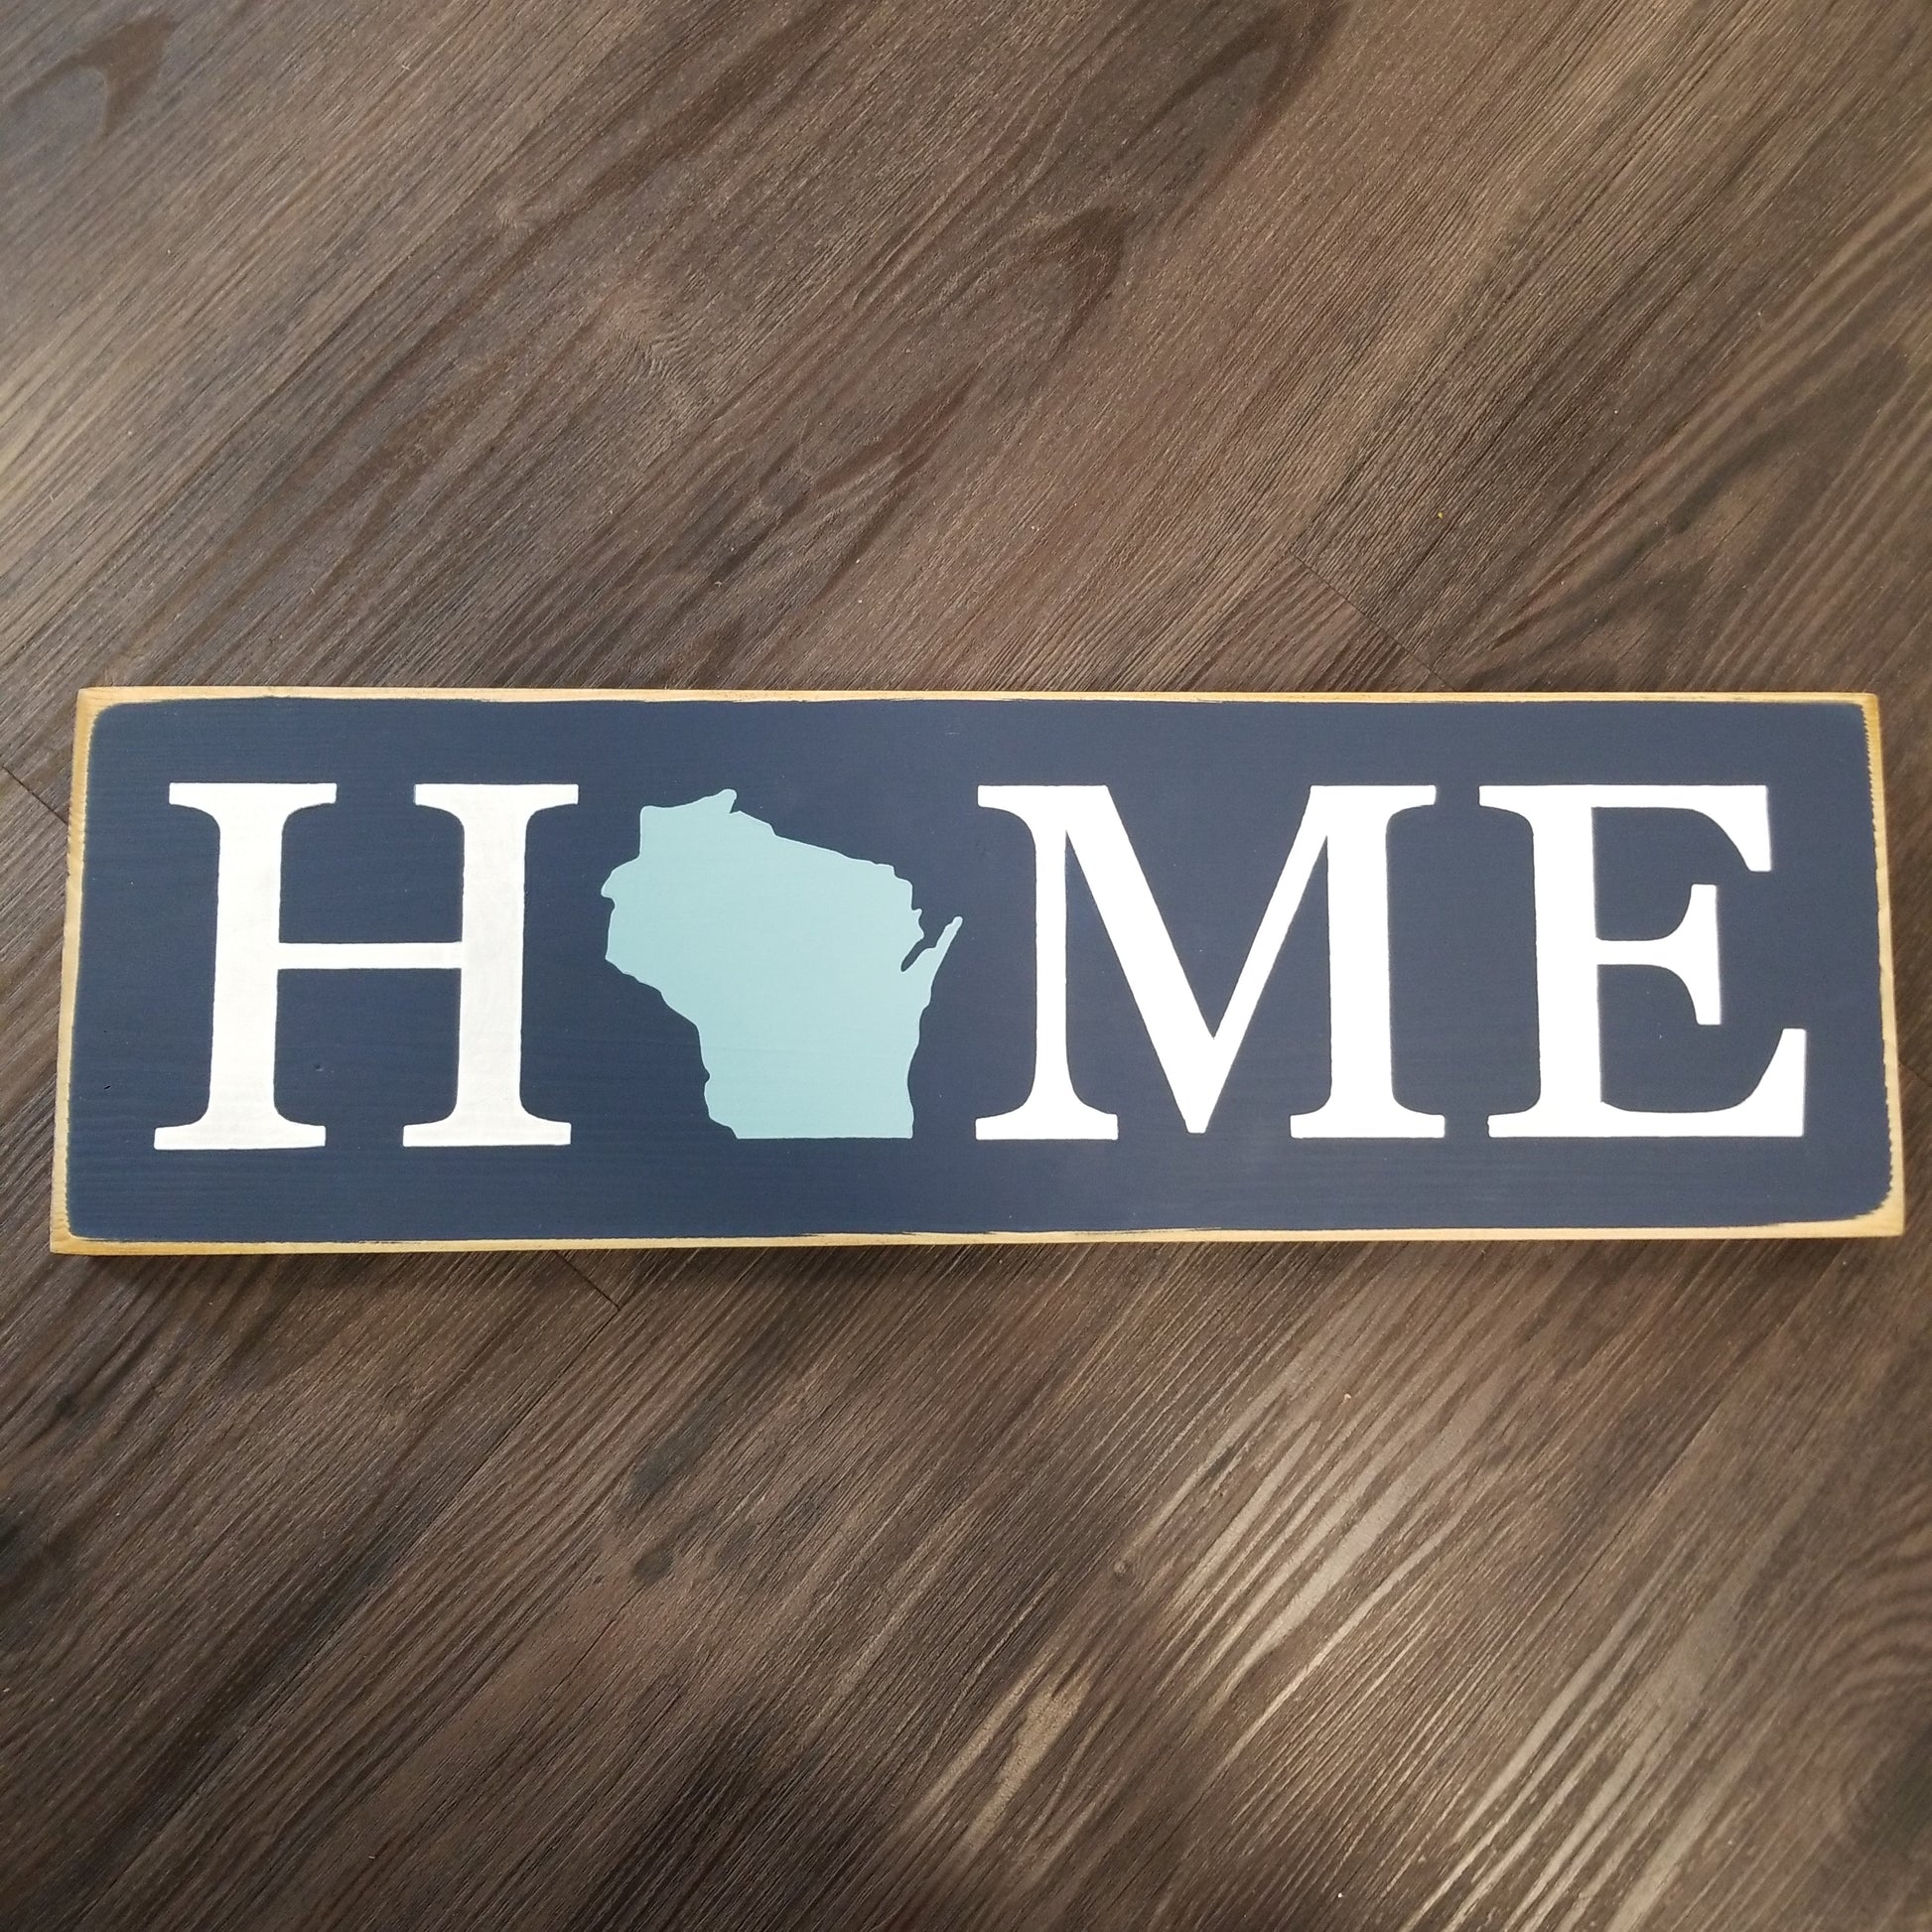 Home Wisconsin sign